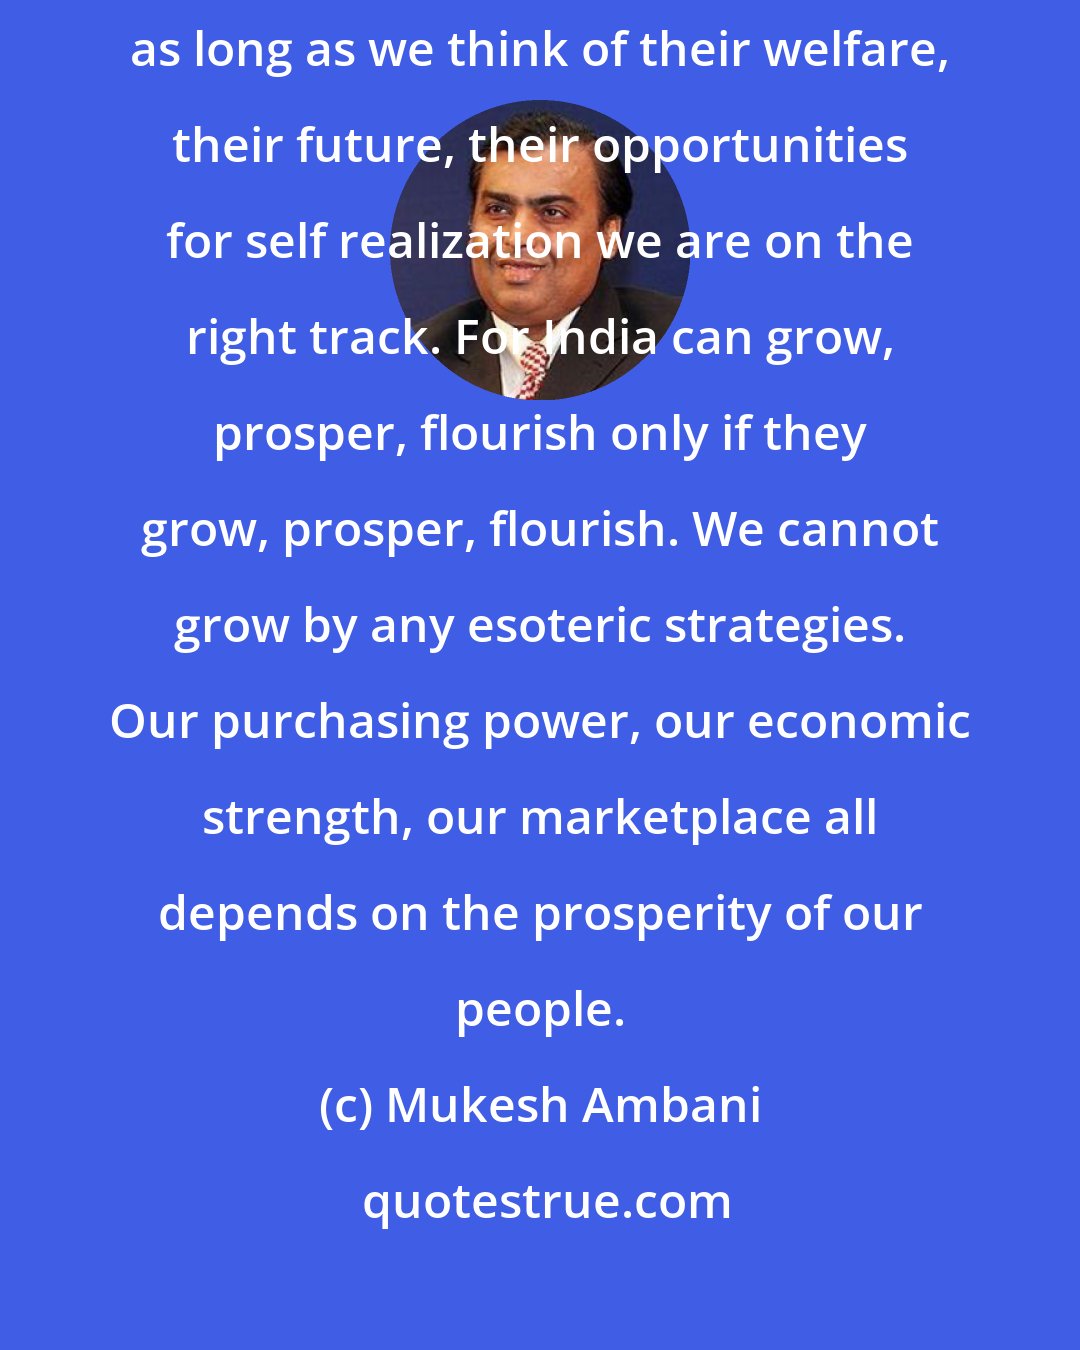 Mukesh Ambani: As long as we place millions of Indians at the canter of our thought process, as long as we think of their welfare, their future, their opportunities for self realization we are on the right track. For India can grow, prosper, flourish only if they grow, prosper, flourish. We cannot grow by any esoteric strategies. Our purchasing power, our economic strength, our marketplace all depends on the prosperity of our people.